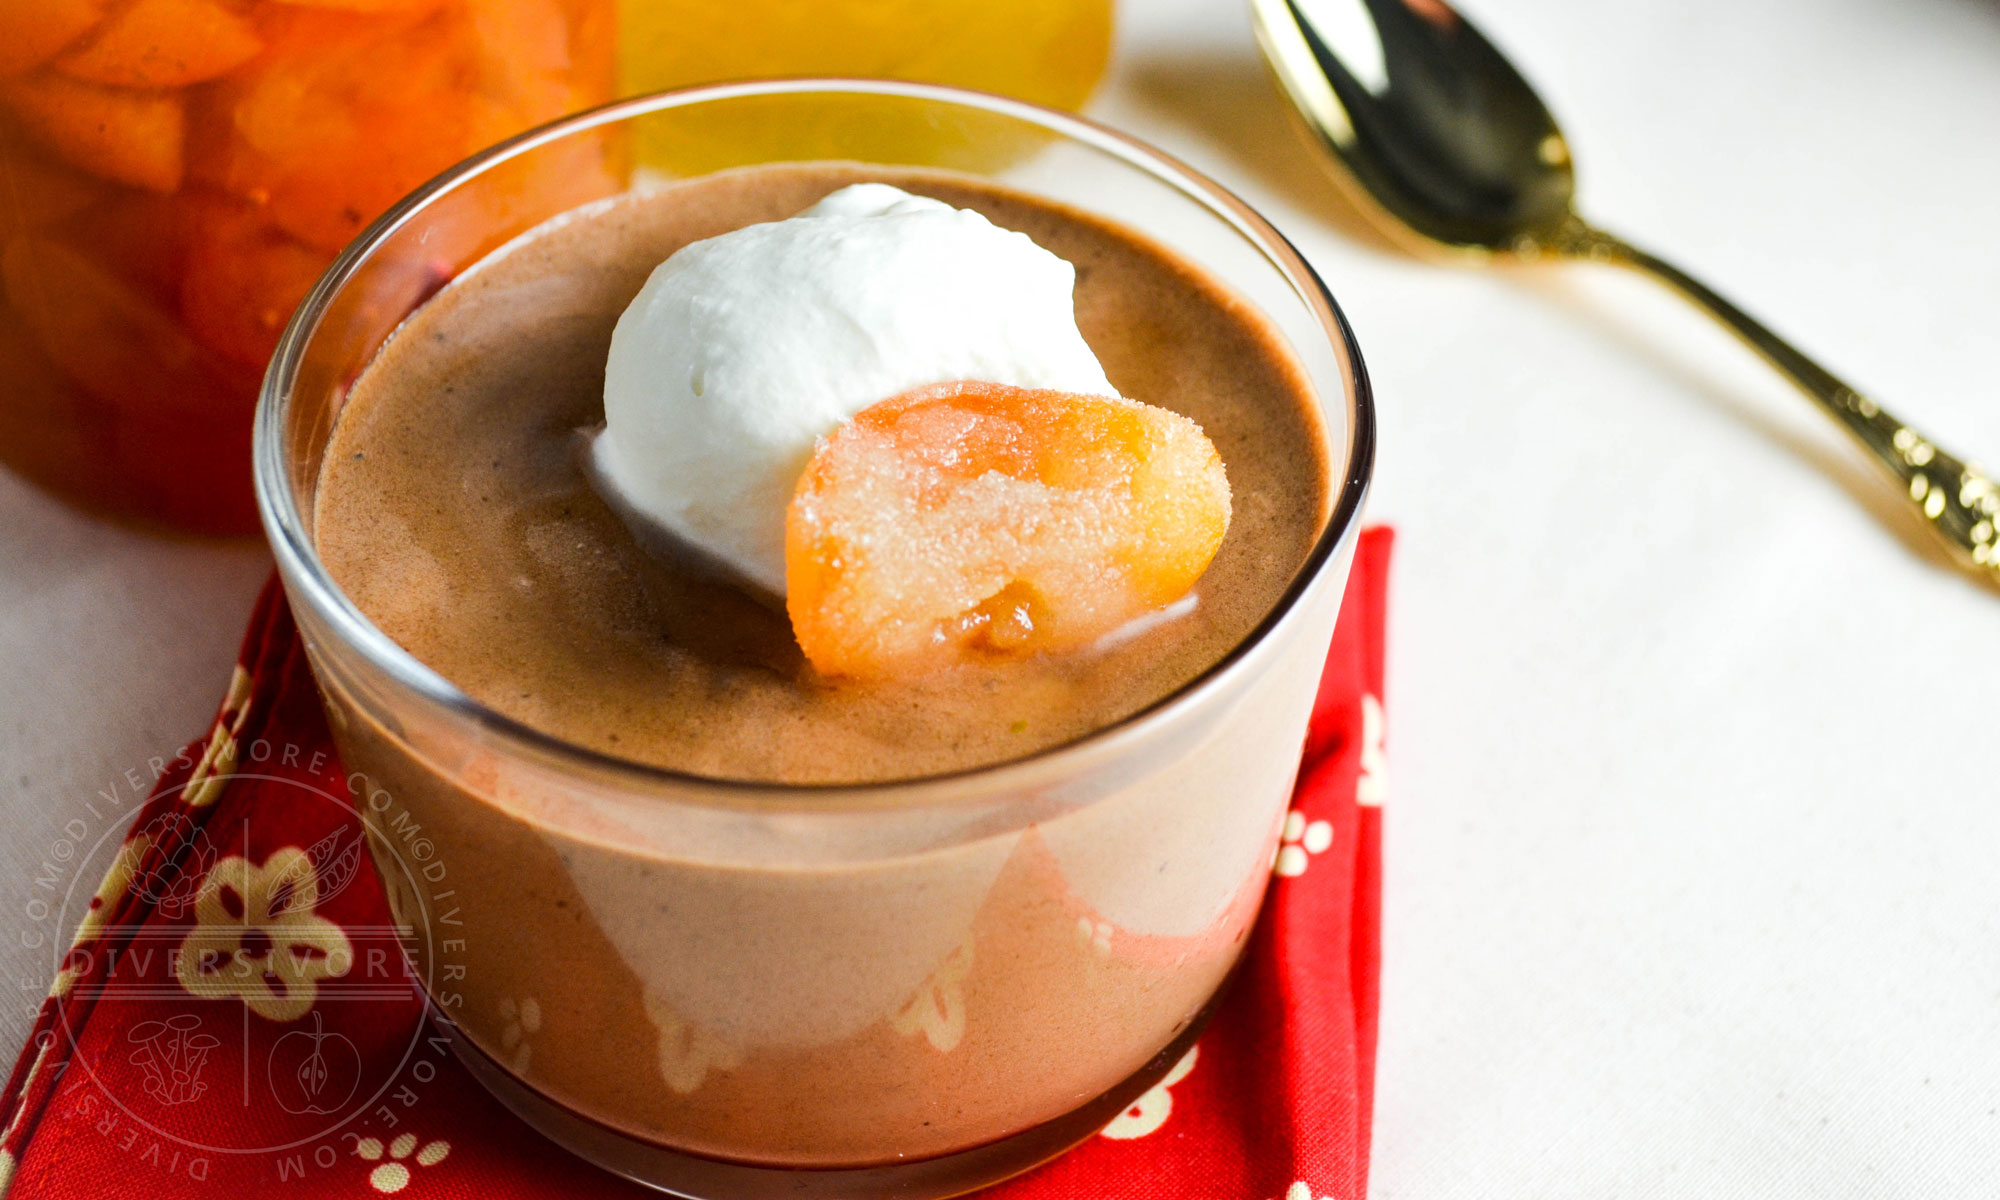 Chocolate mousse with candied kumquats and whipped cream in a glass with a gold spoon